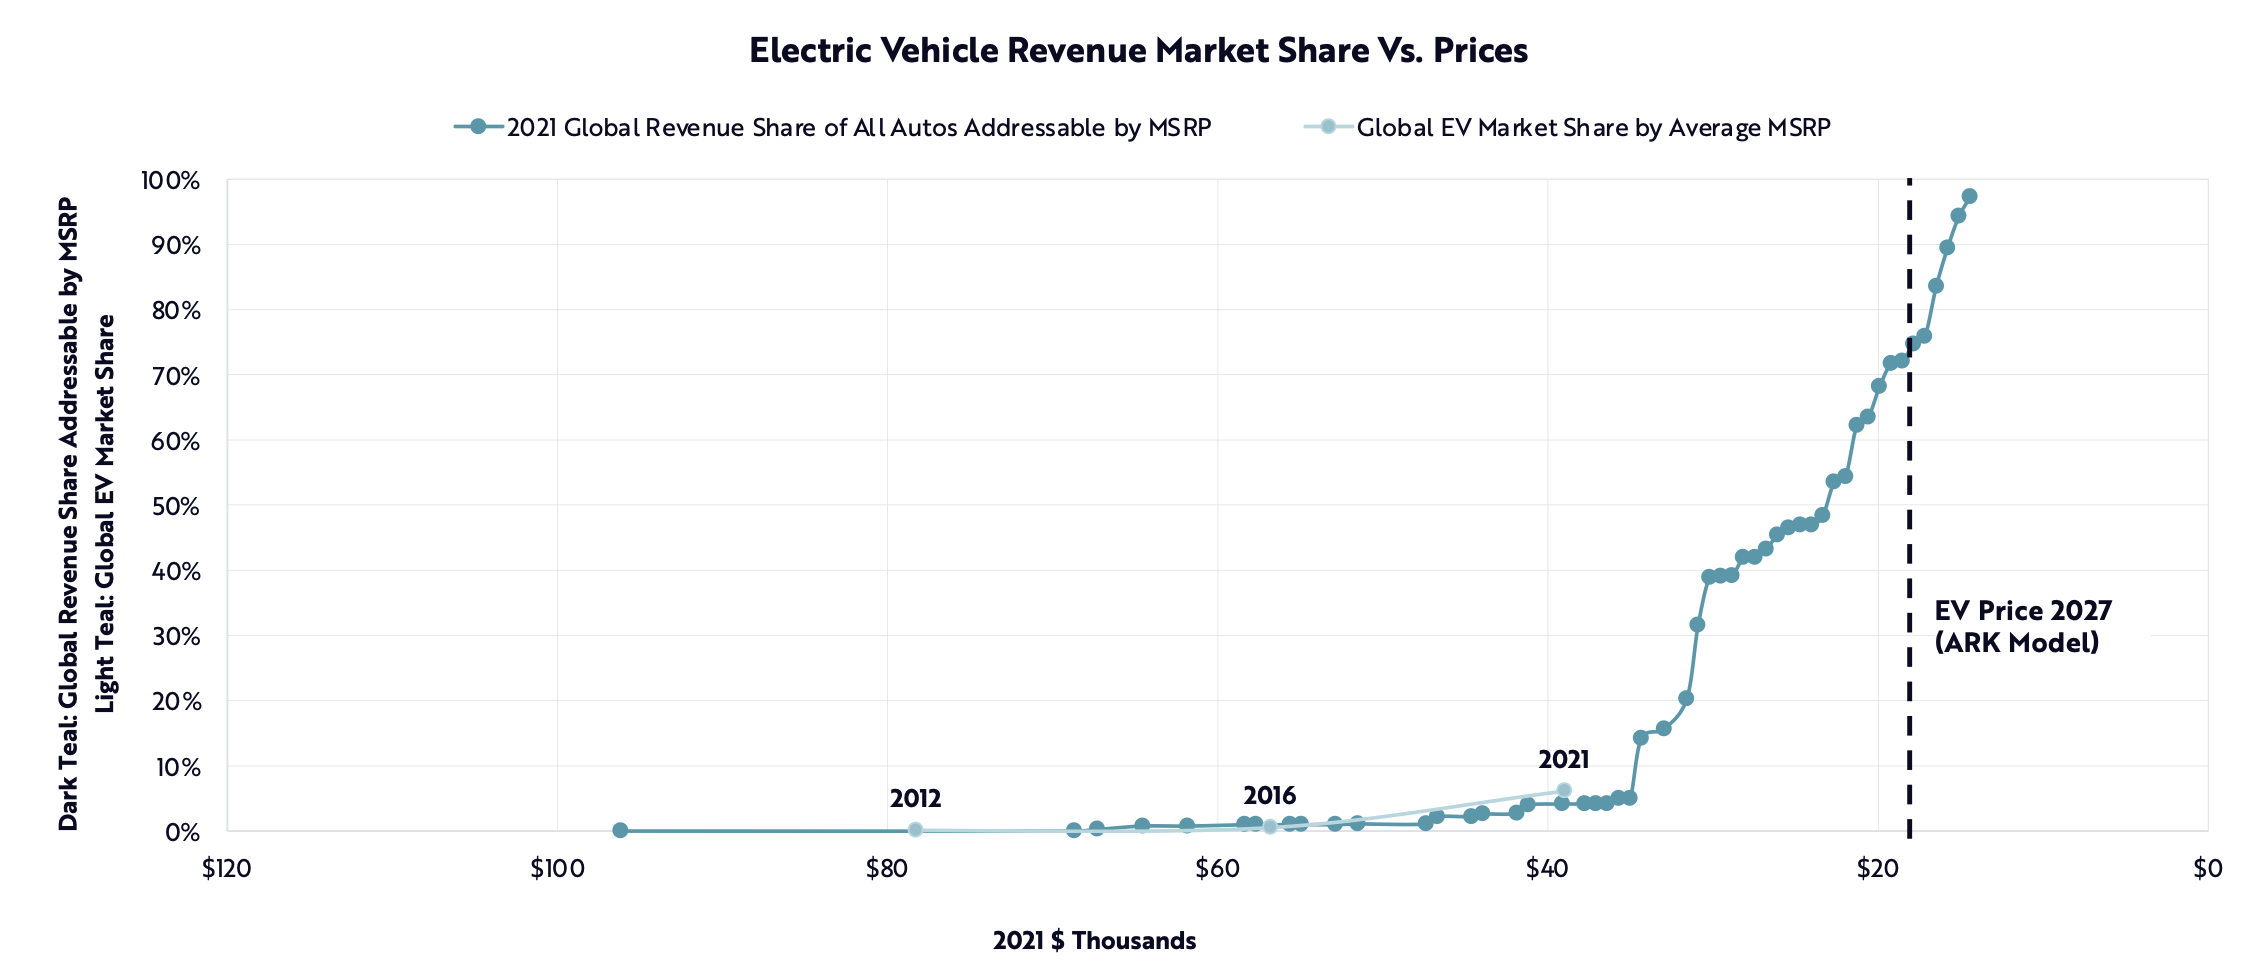  			 				 					 						Battery Cost Declines Should Continue To Drive Exponential Growth in EV Sales (Source: ARK Invest) 					 				 			
